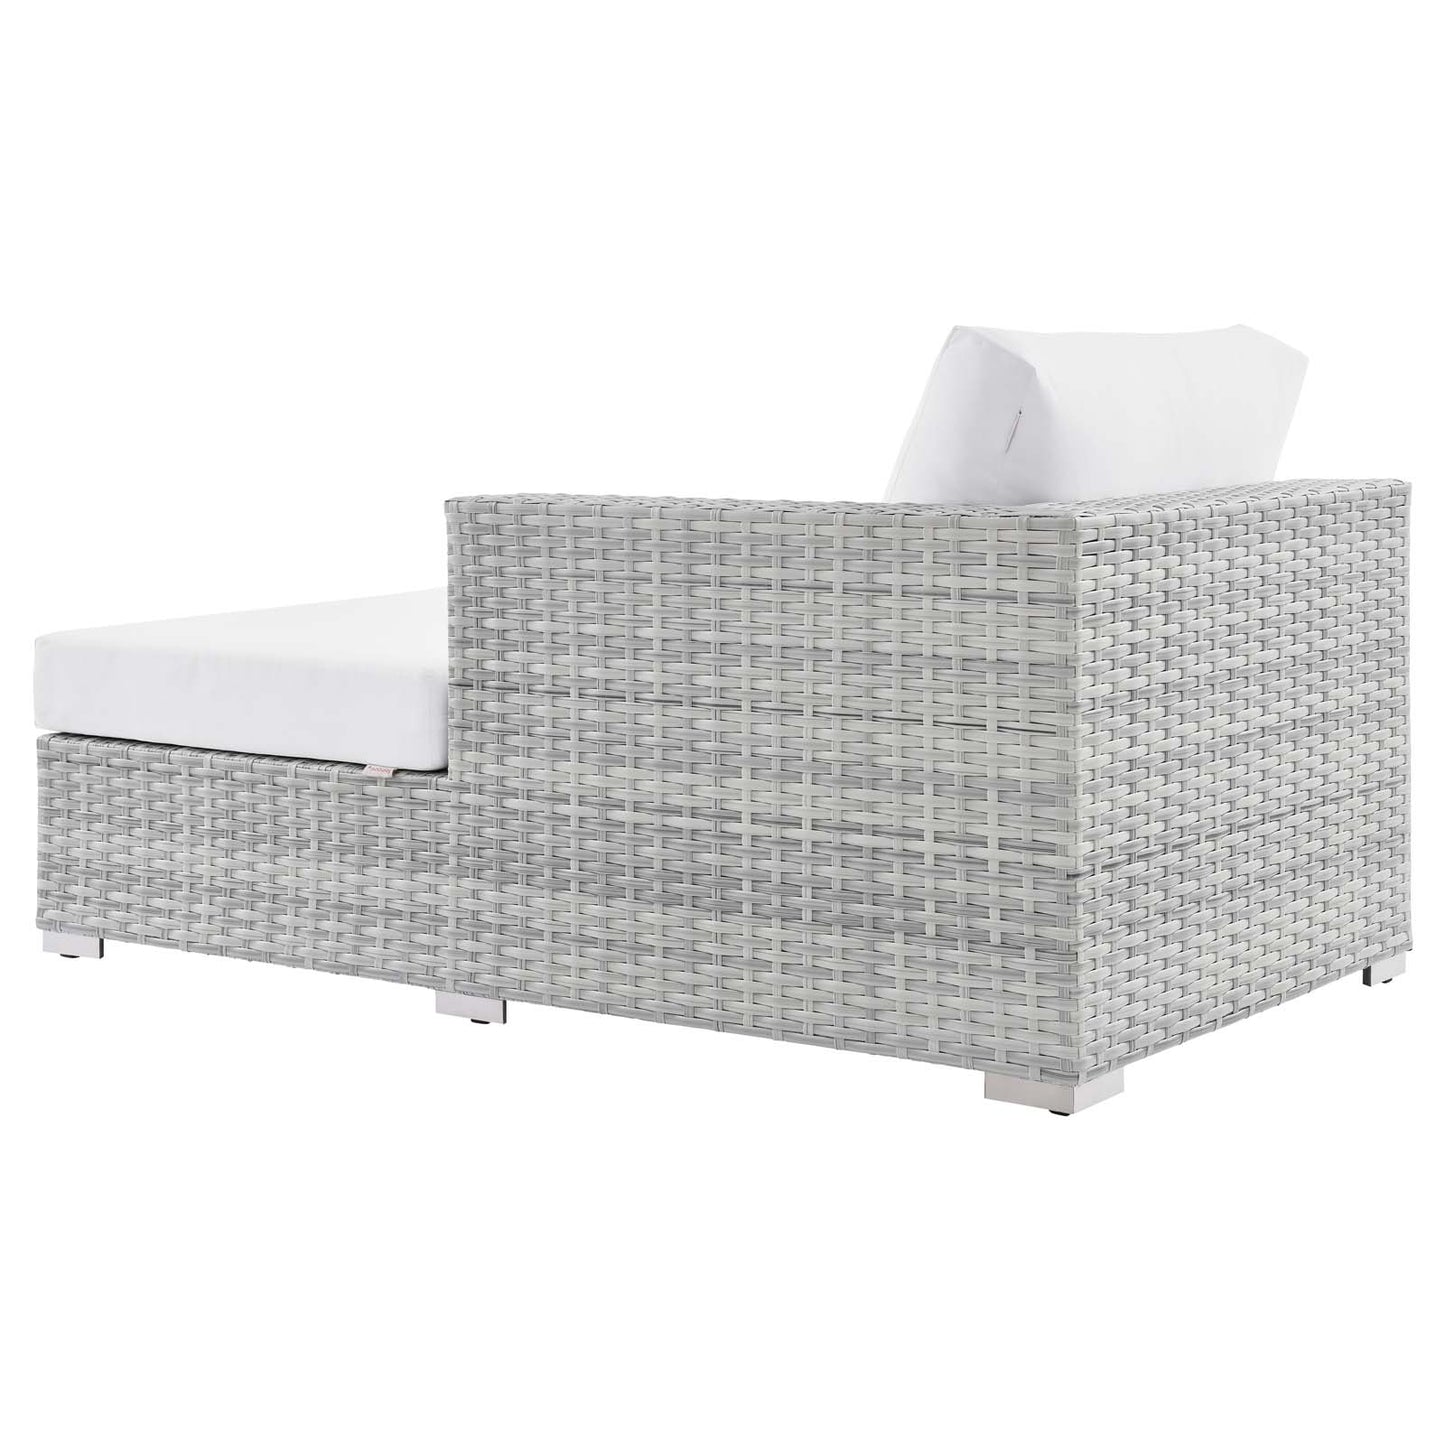 Convene Outdoor Patio Right Chaise Light Gray White EEI-4304-LGR-WHI